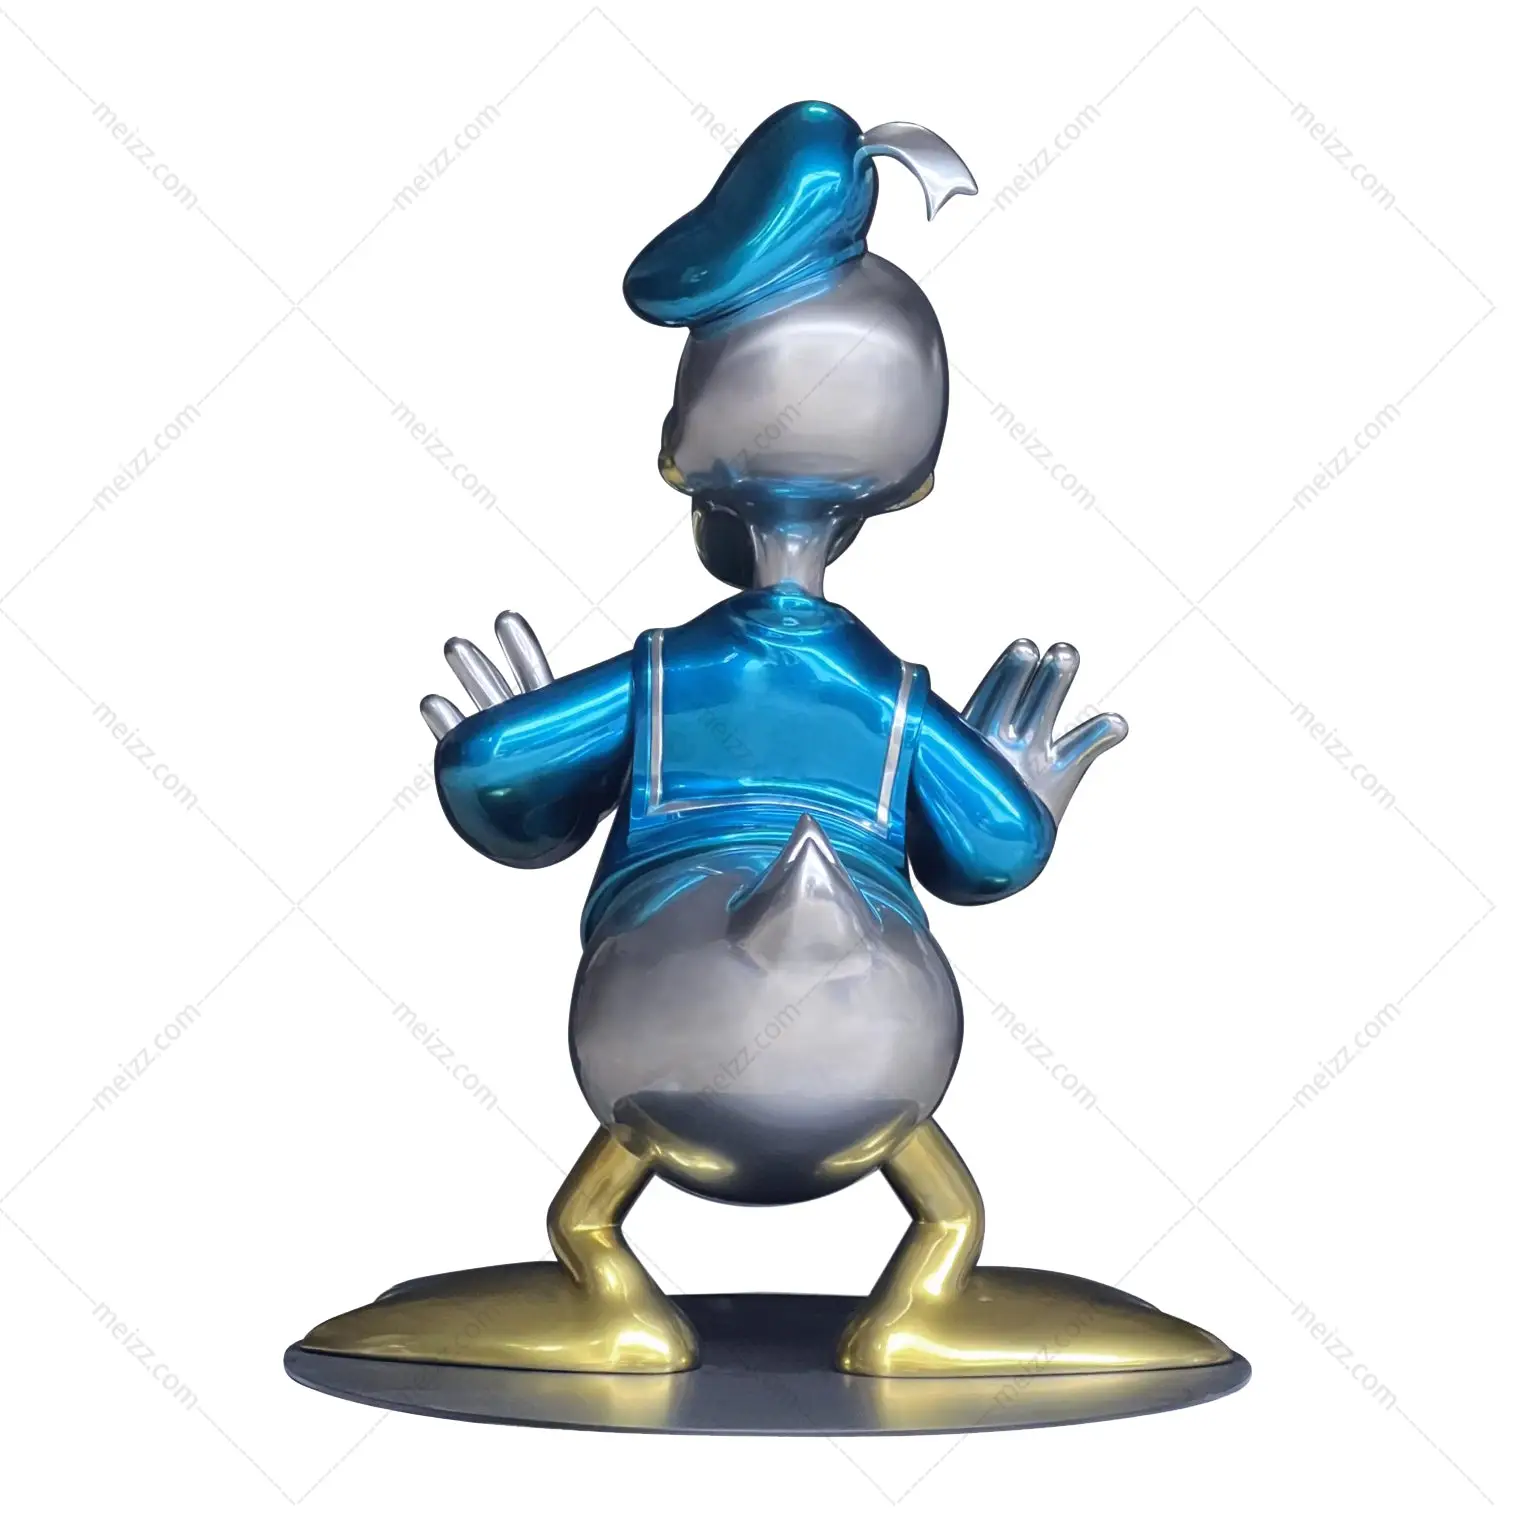 large donald duck statue